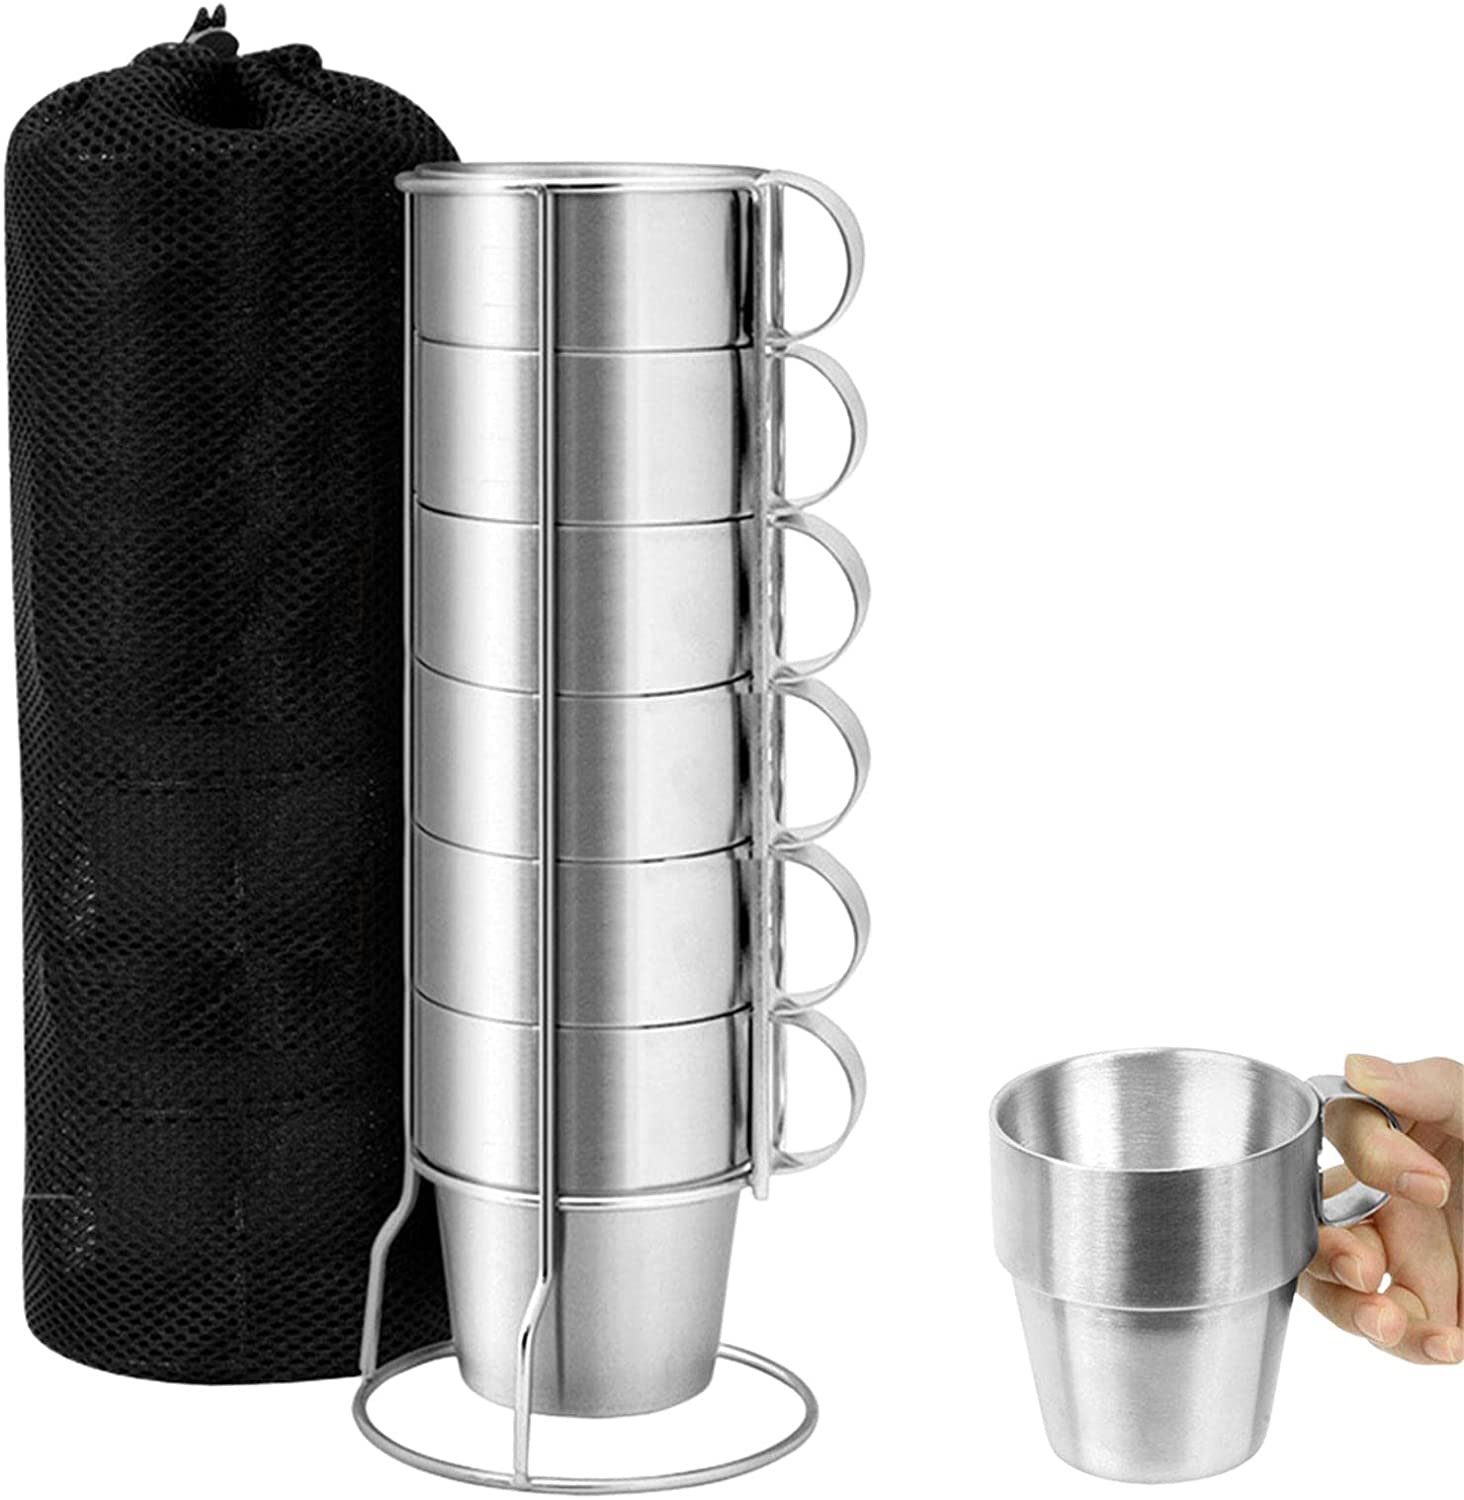 6pcs 10oz Stainless Steel Coffee Mug, Double Insulated Vacuum Drinking Cups with Handle